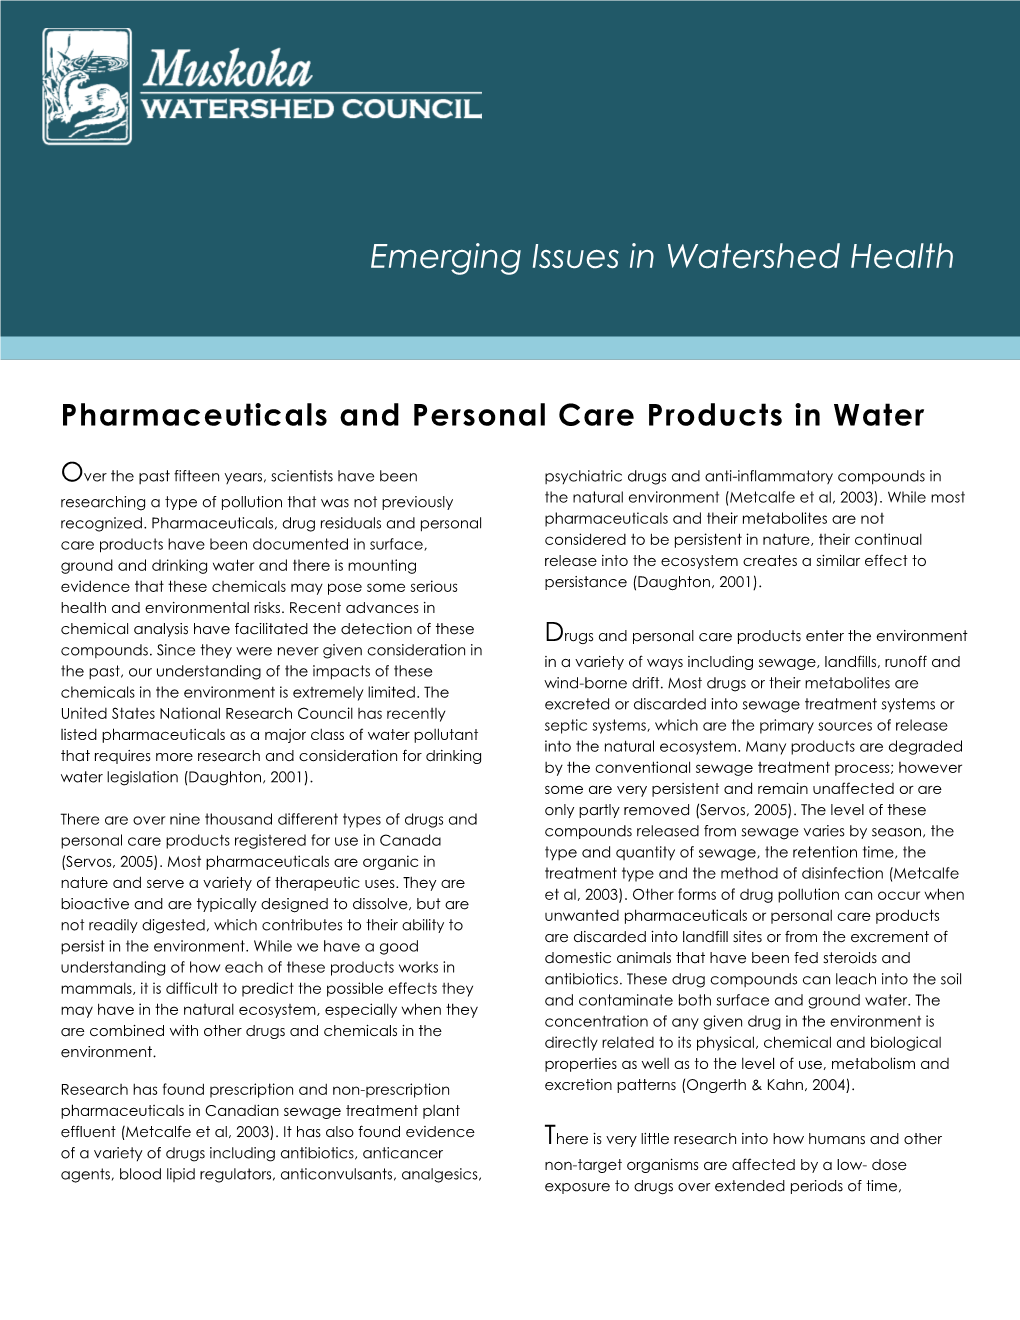 Pharmaceuticals and Personal Care Products in Water